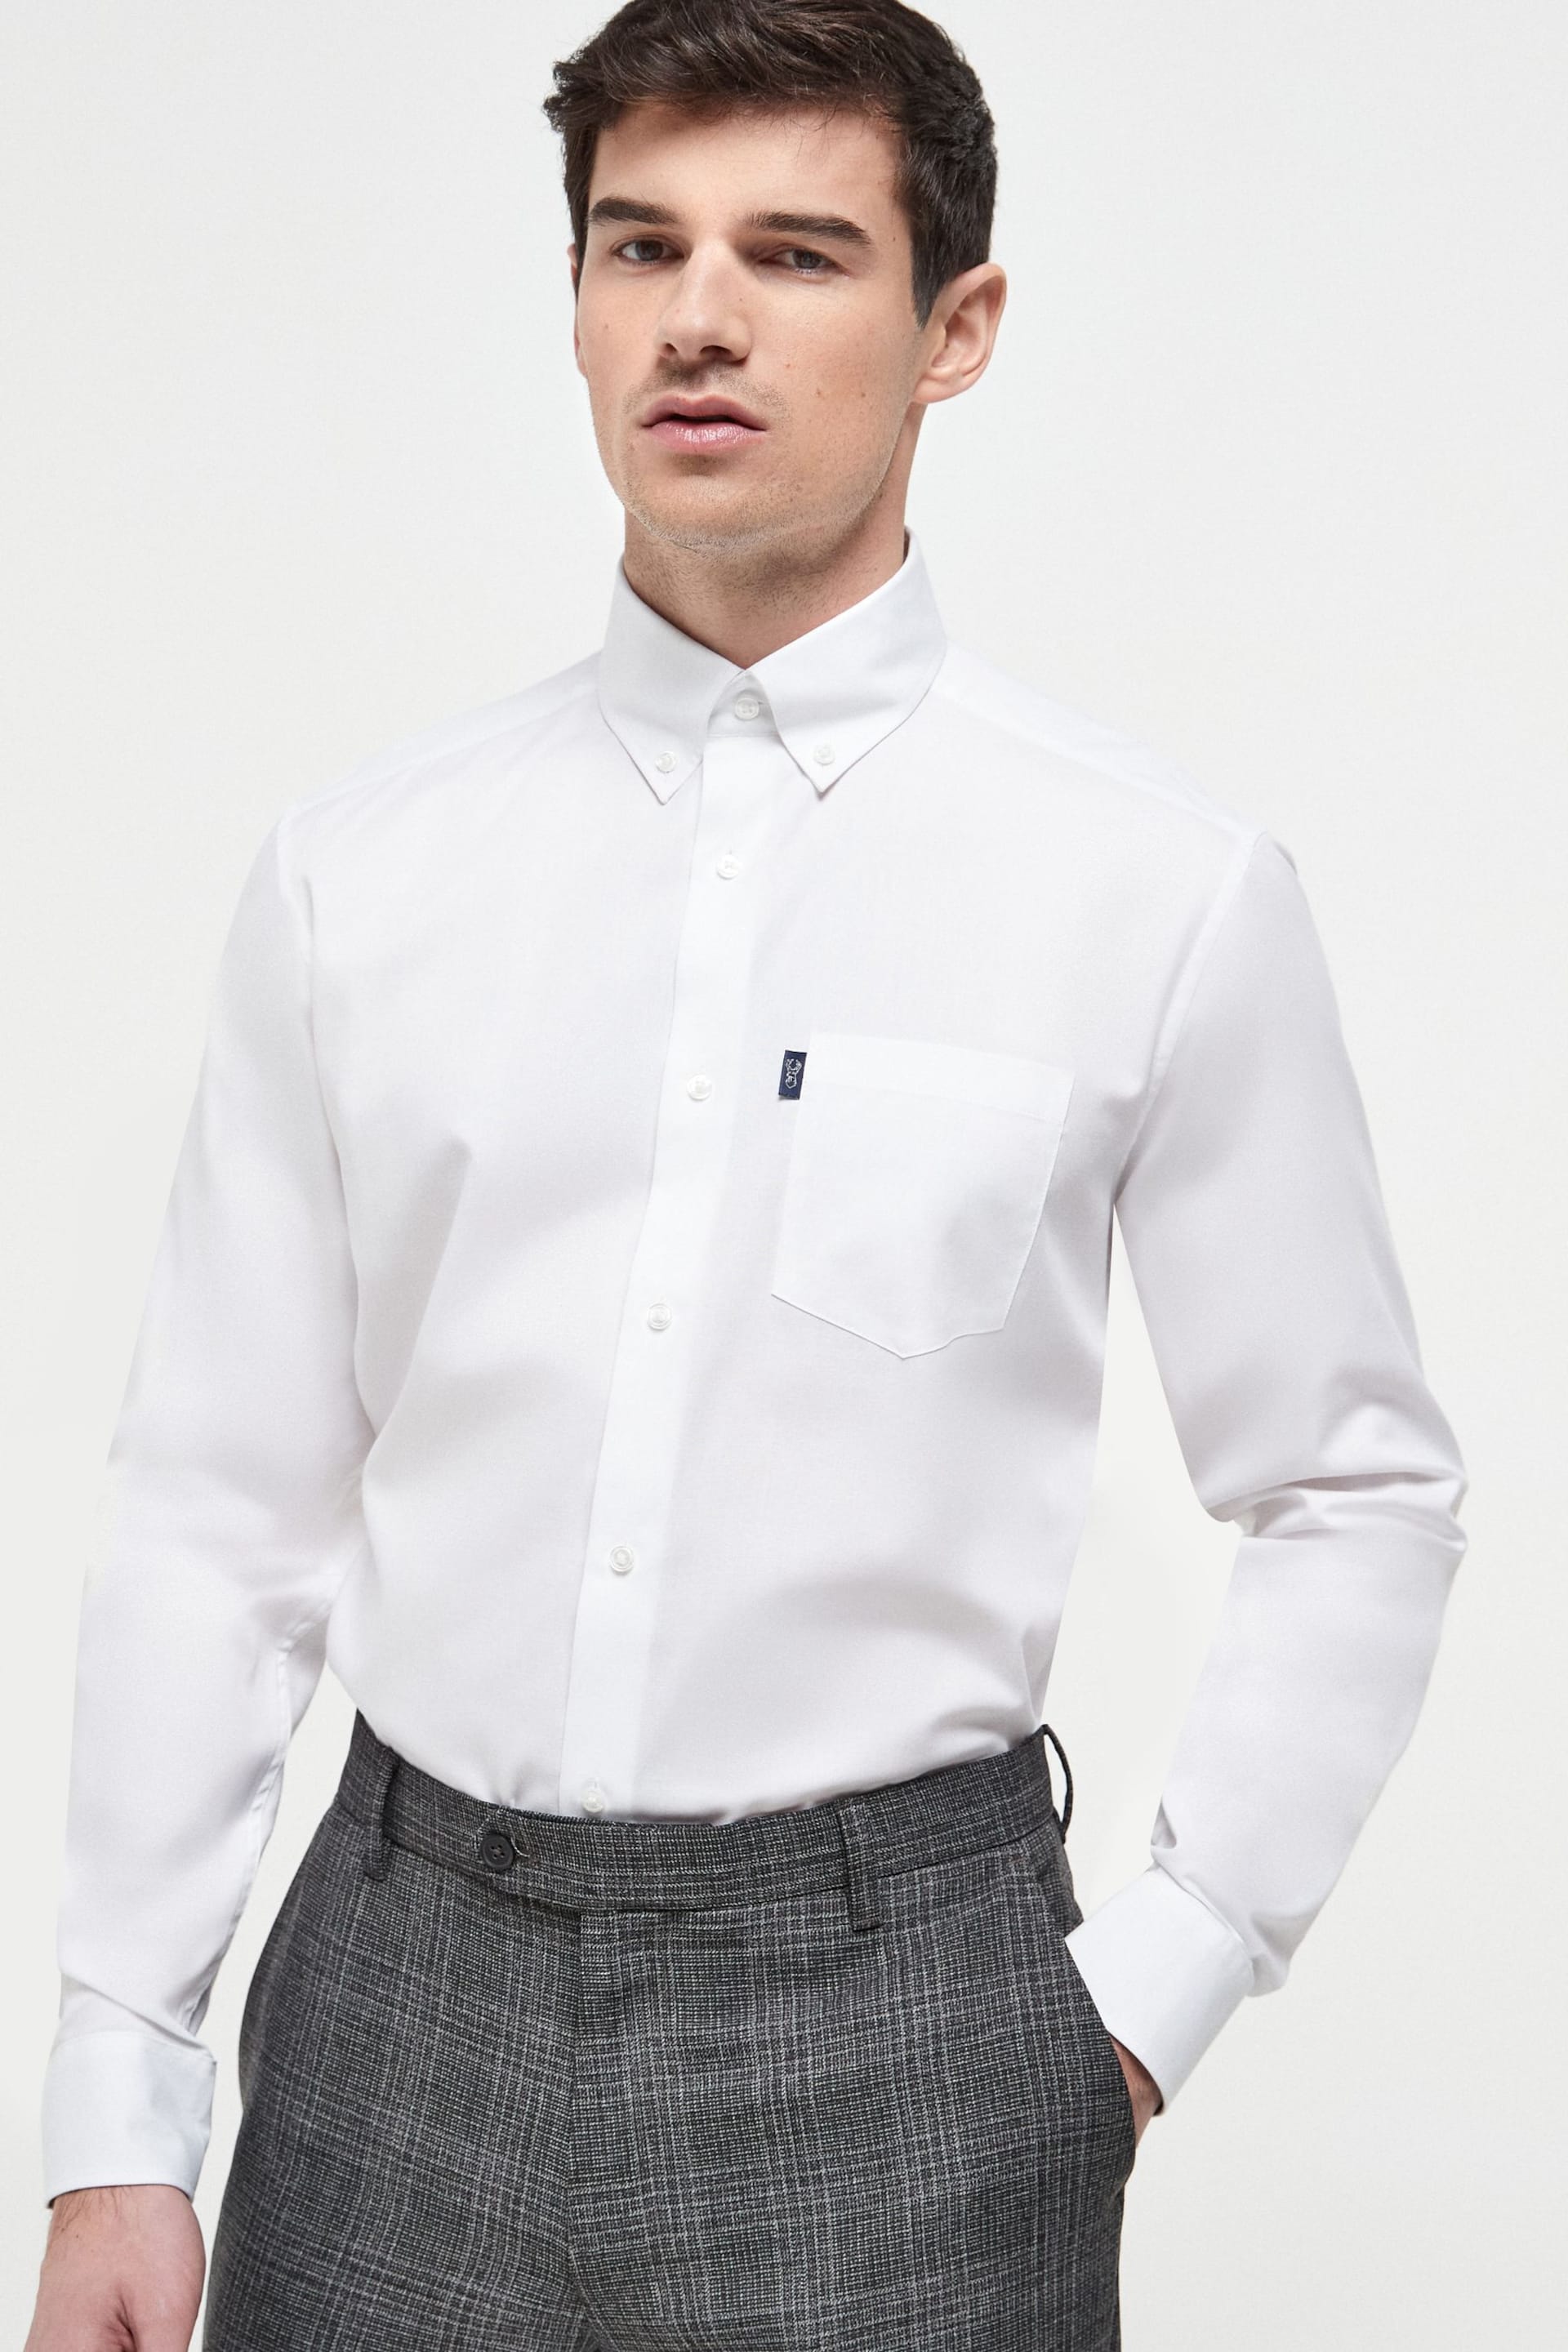 White Slim Fit Easy Iron Button Down Oxford Shirt - Image 1 of 6